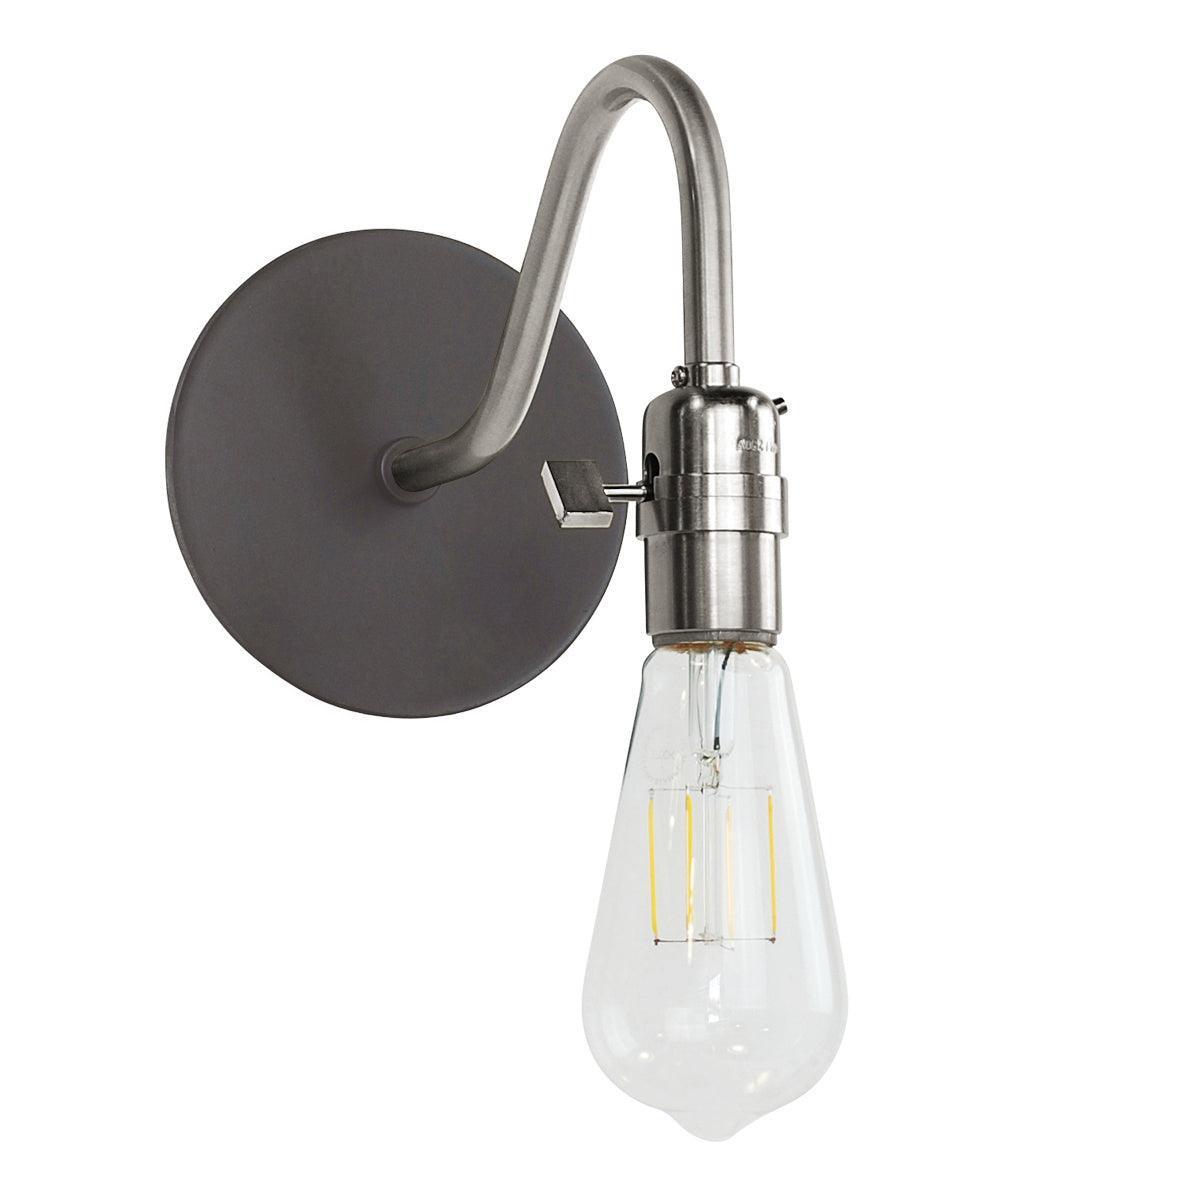 Montclair Light Works - Uno SCL400 Wall Sconce - SCL400-51-96 | Montreal Lighting & Hardware